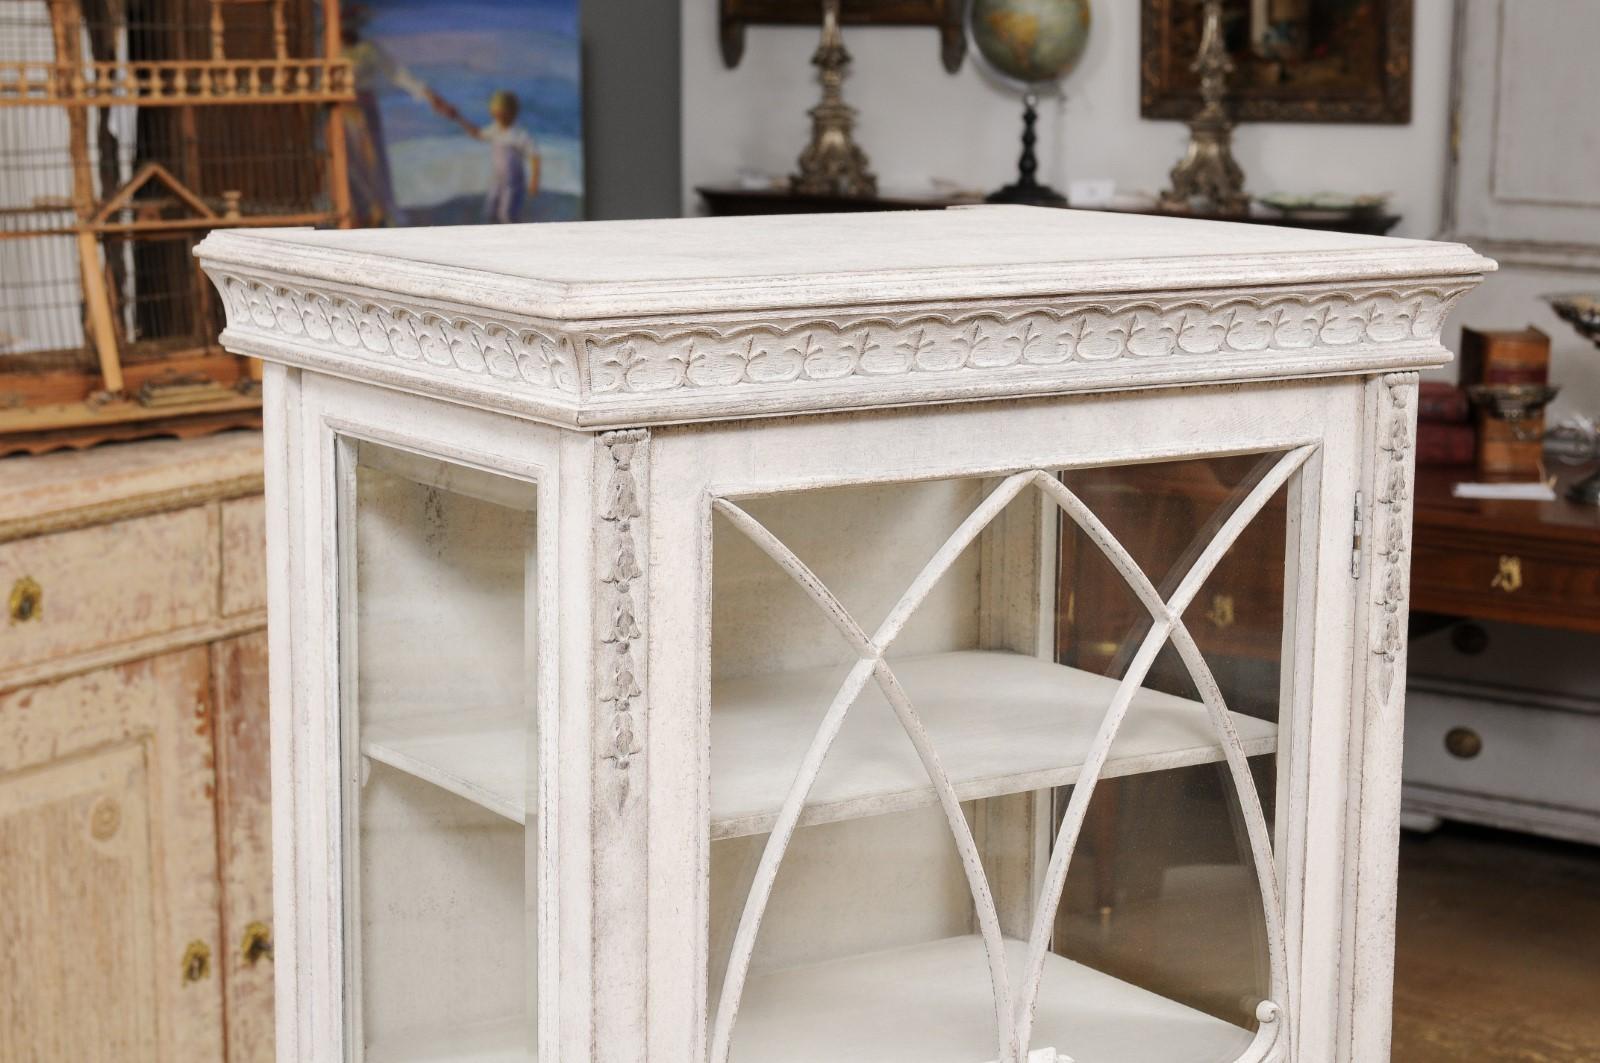 European 1890s Painted Vitrine Cabinet with Glass Door and Richly Carved Décor For Sale 1